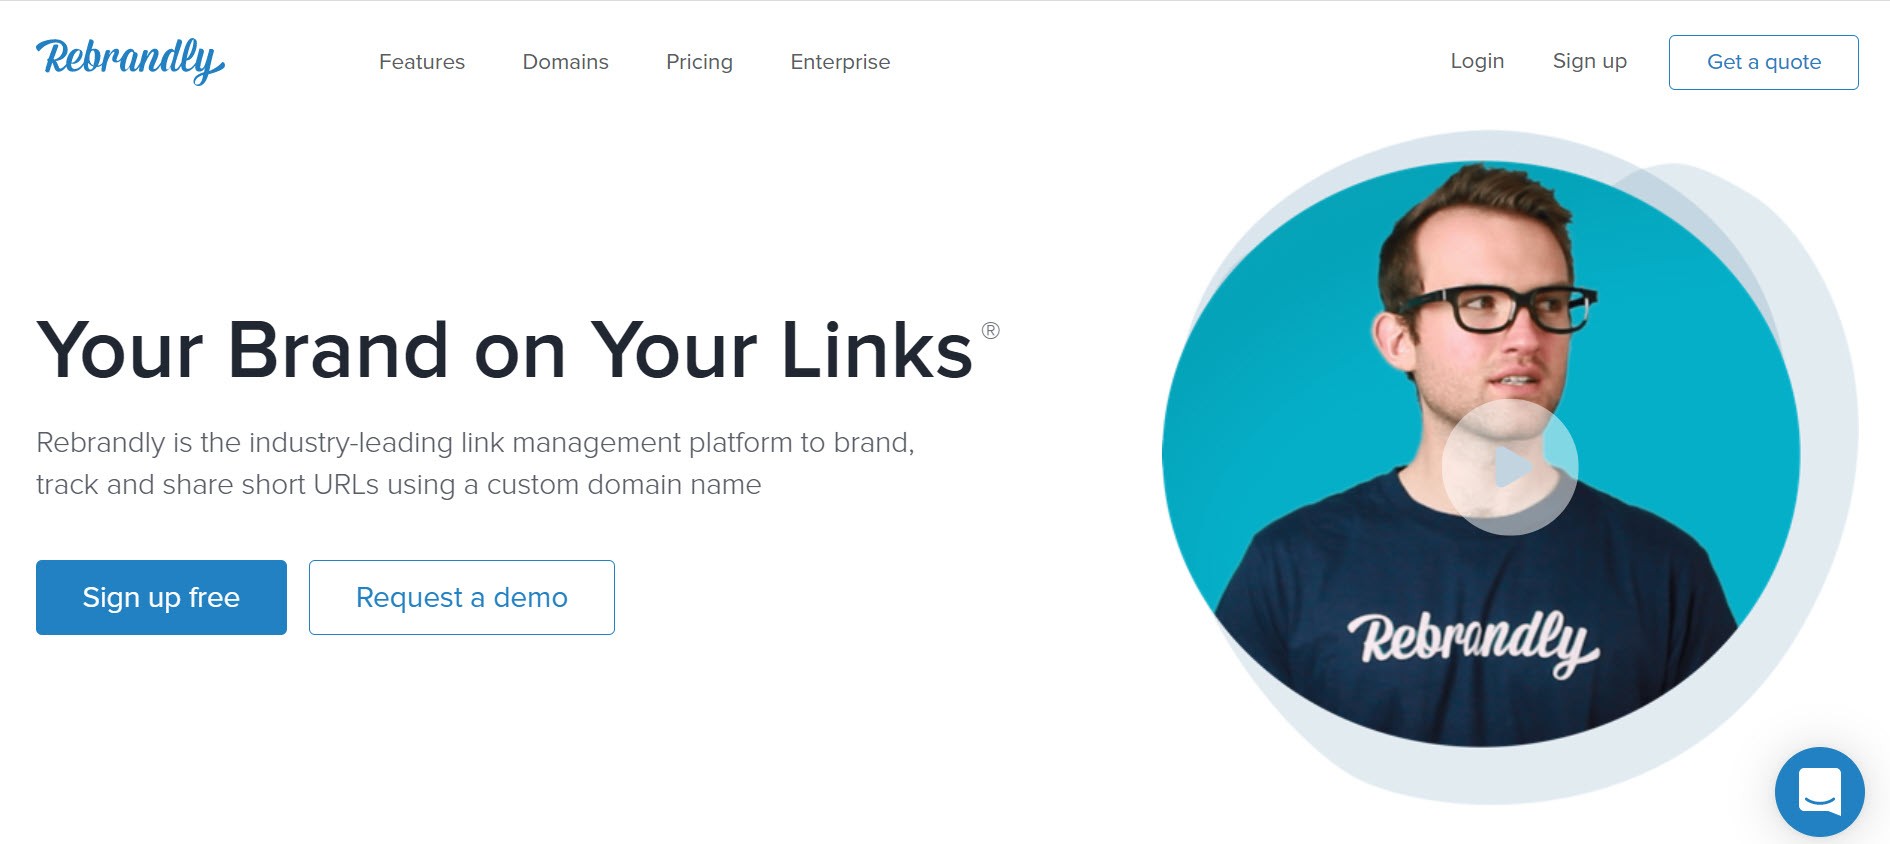 Rebrandly Your Brand on Your Links